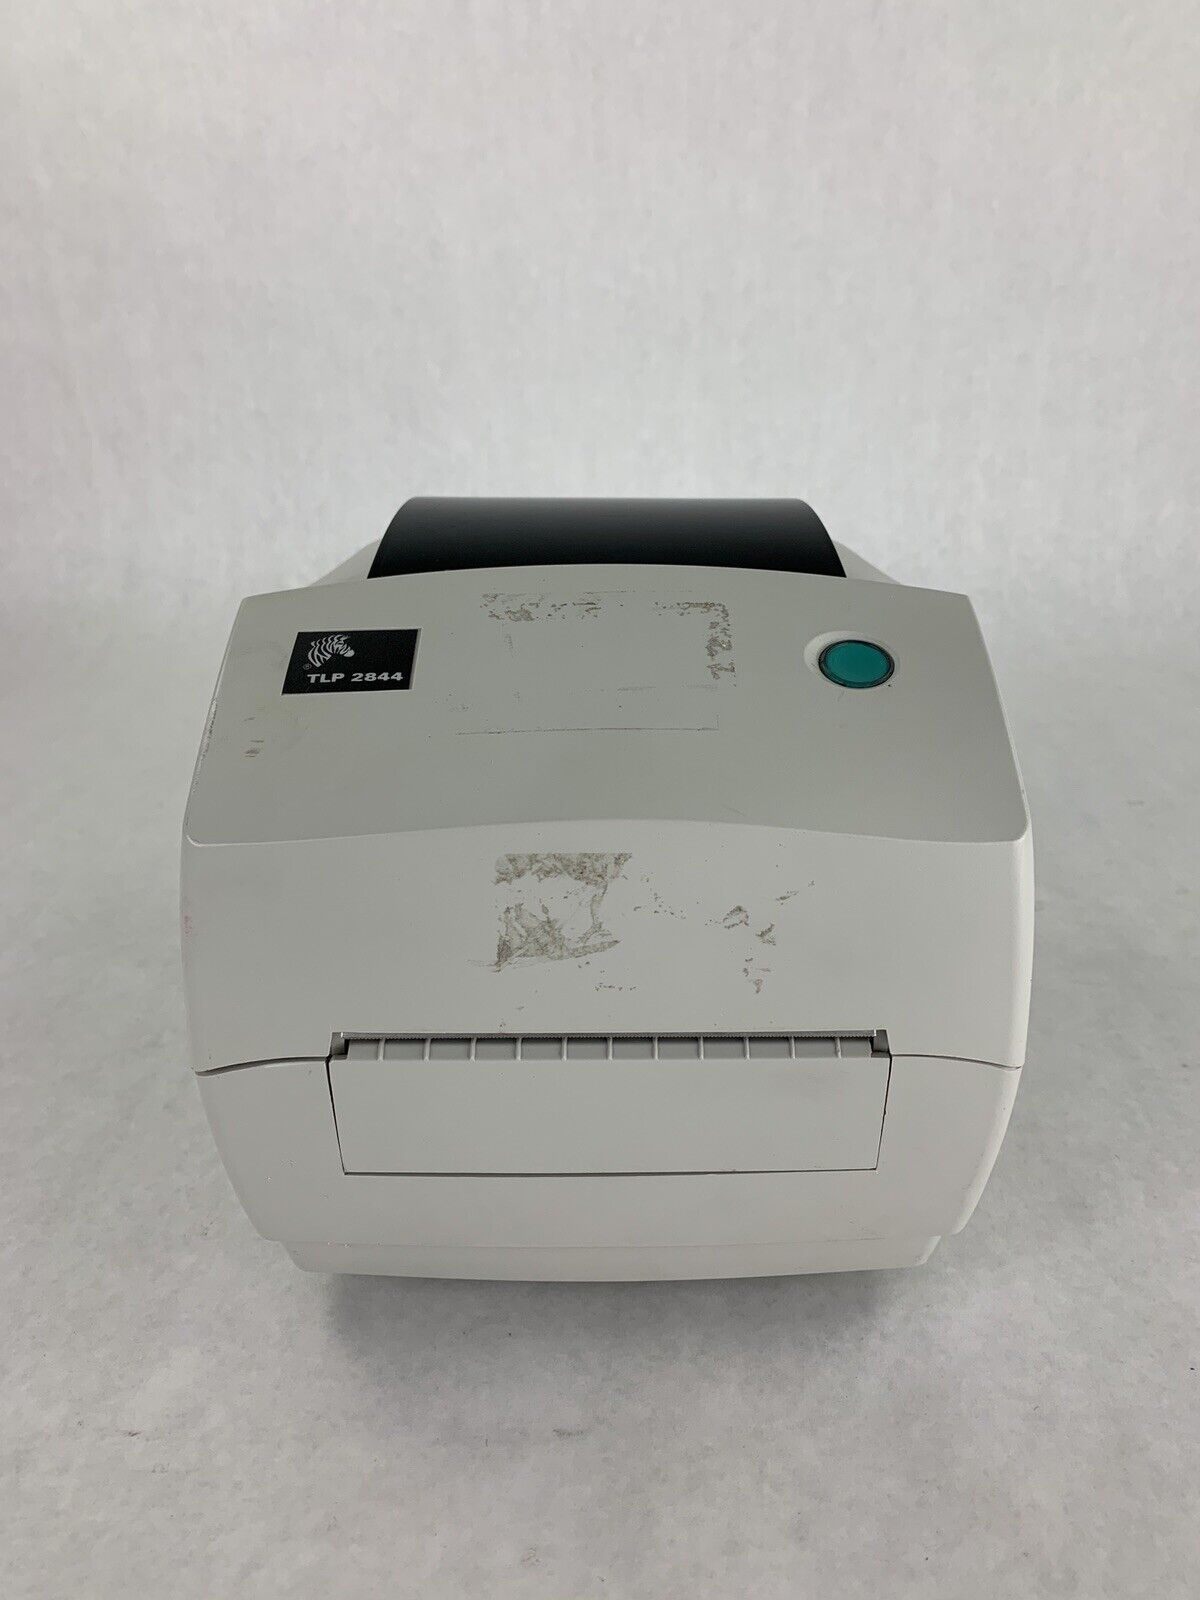 Zebra TLP 2844 Label Thermal Printer Power Tested for Parts and Repair